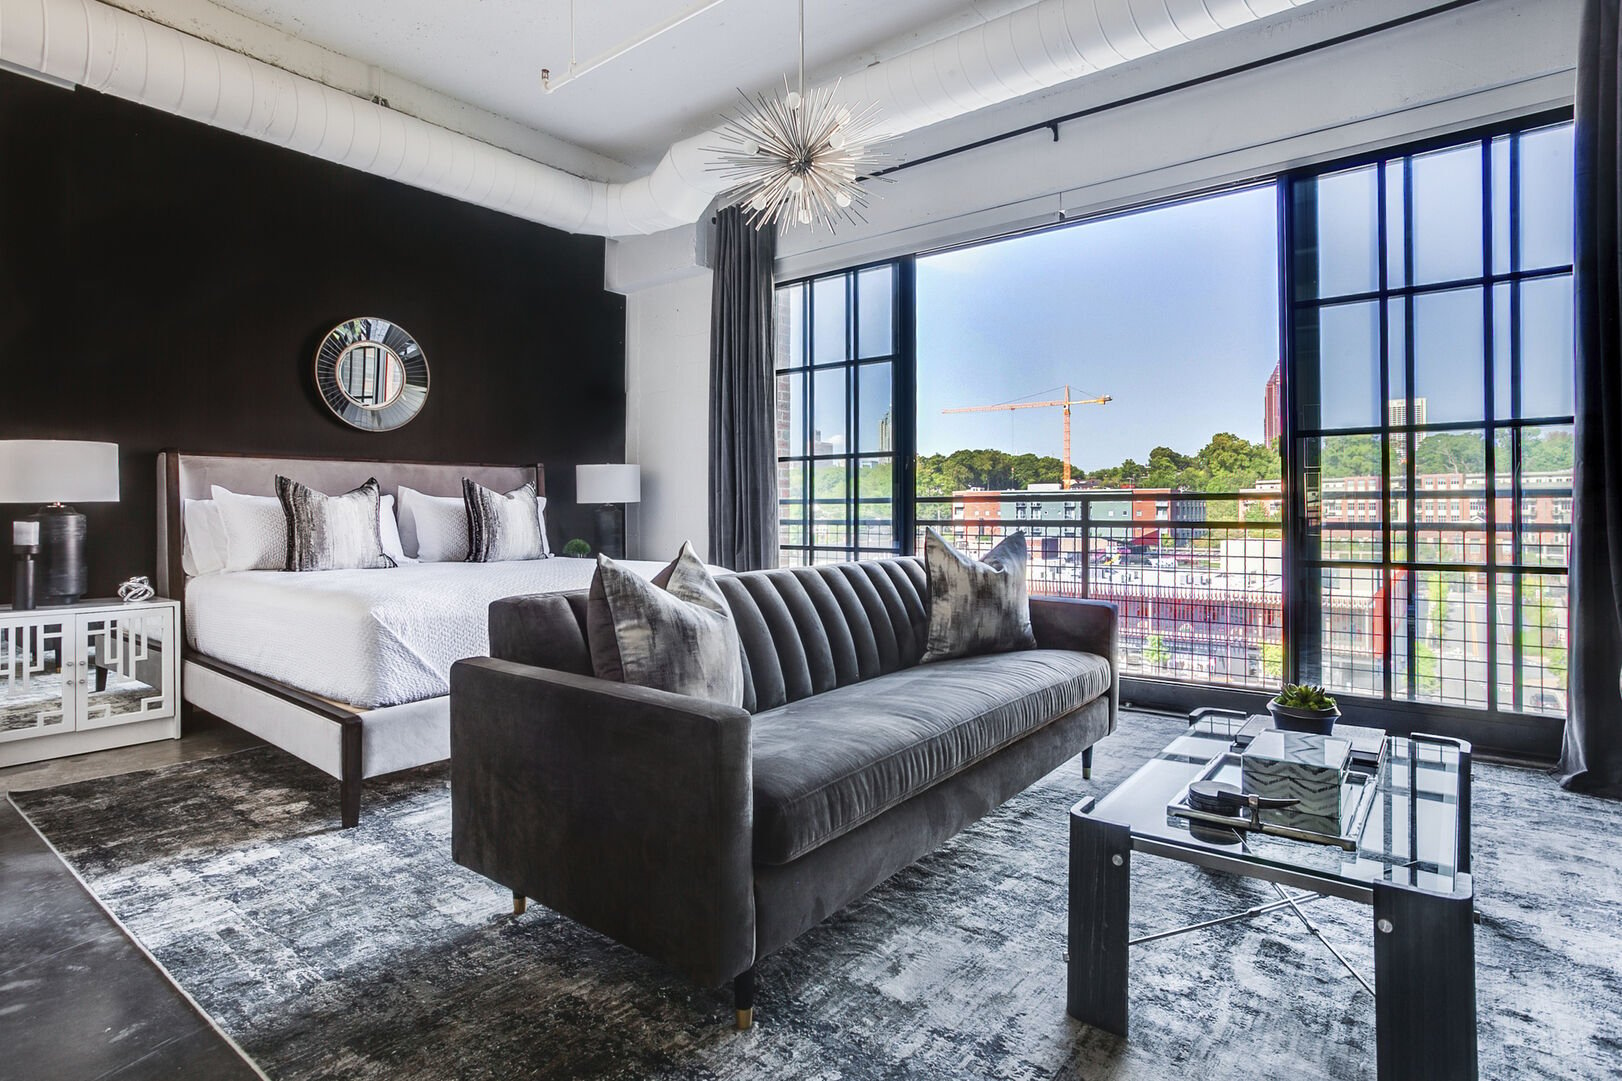 Living and Sleeping are comfortable on the bed and sofa in this Ponce City Market rental.